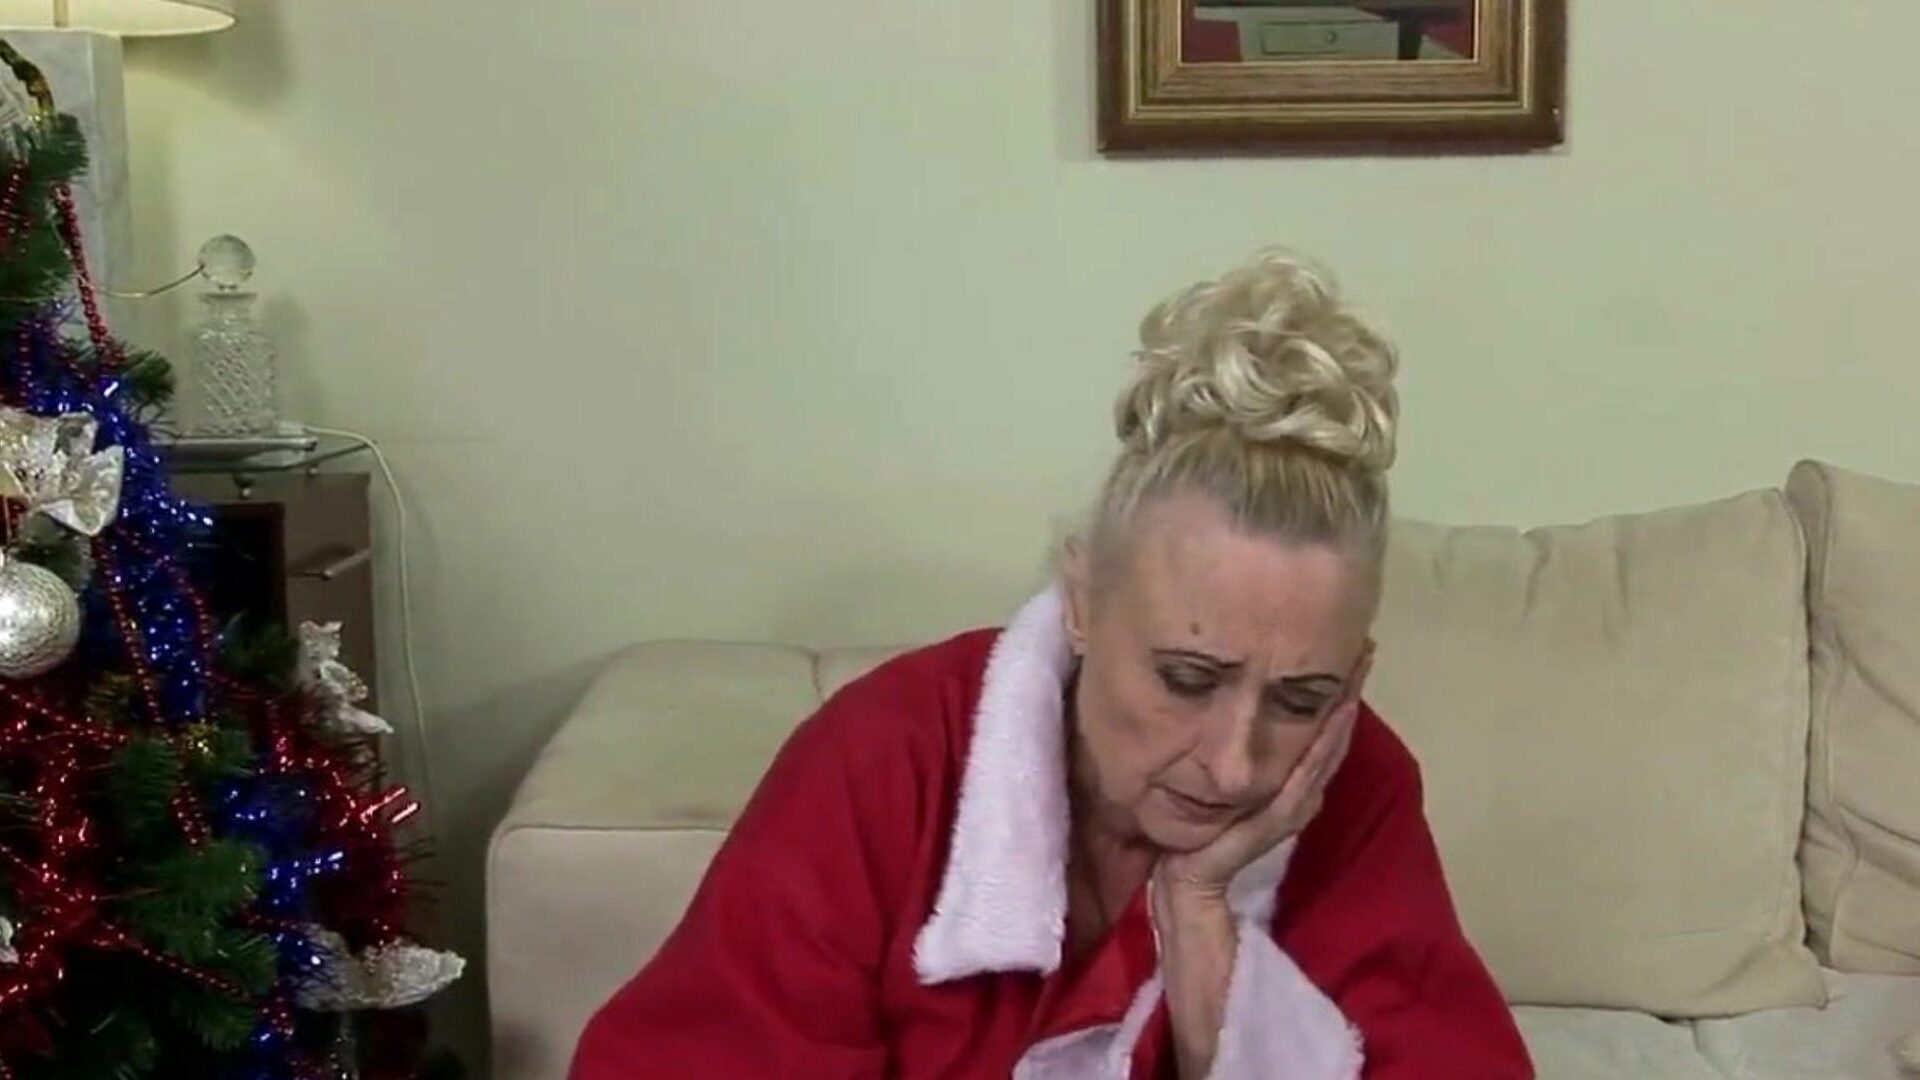 Granny Doesn't Want to Spend Christmas Alone: Free Porn e8 Watch Granny Doesn't Want to Spend Christmas Alone episode on xHamster - the ultimate archive of free-for-all Free Granny & Granny Free Tube HD porn tube episodes